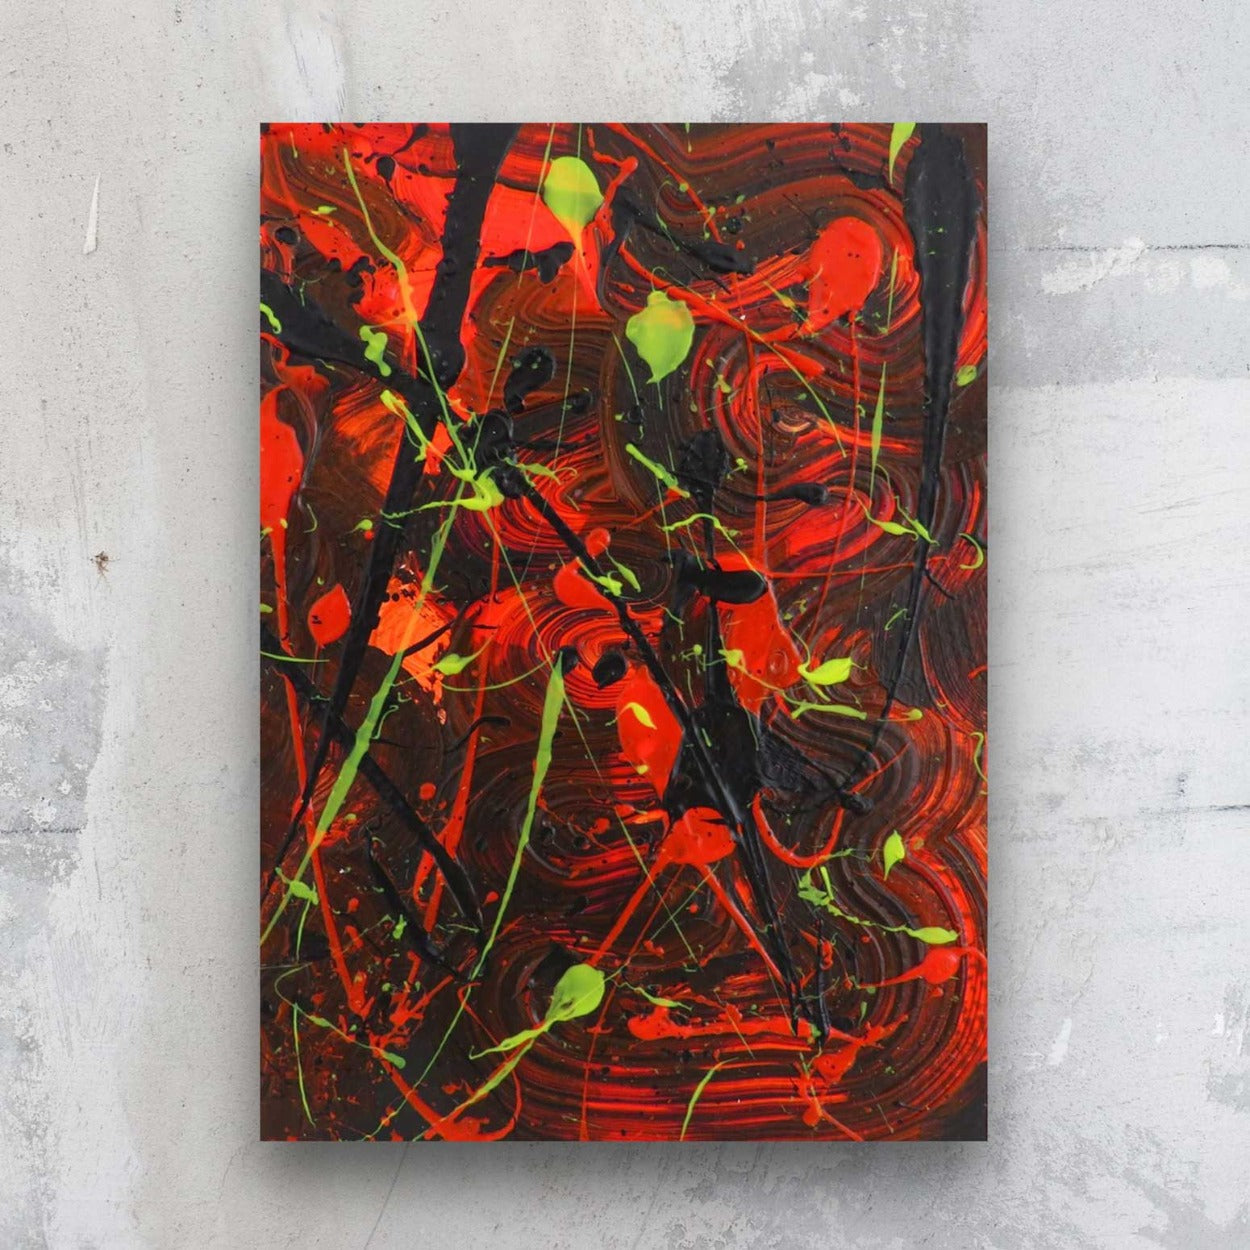 Little Luxuries XIV, original abstract art on paper by Bridget Bradley. Colour palette, dark background  with swirls of neons red ornages and neon yellow and black marks, seen against a stone wall in situ